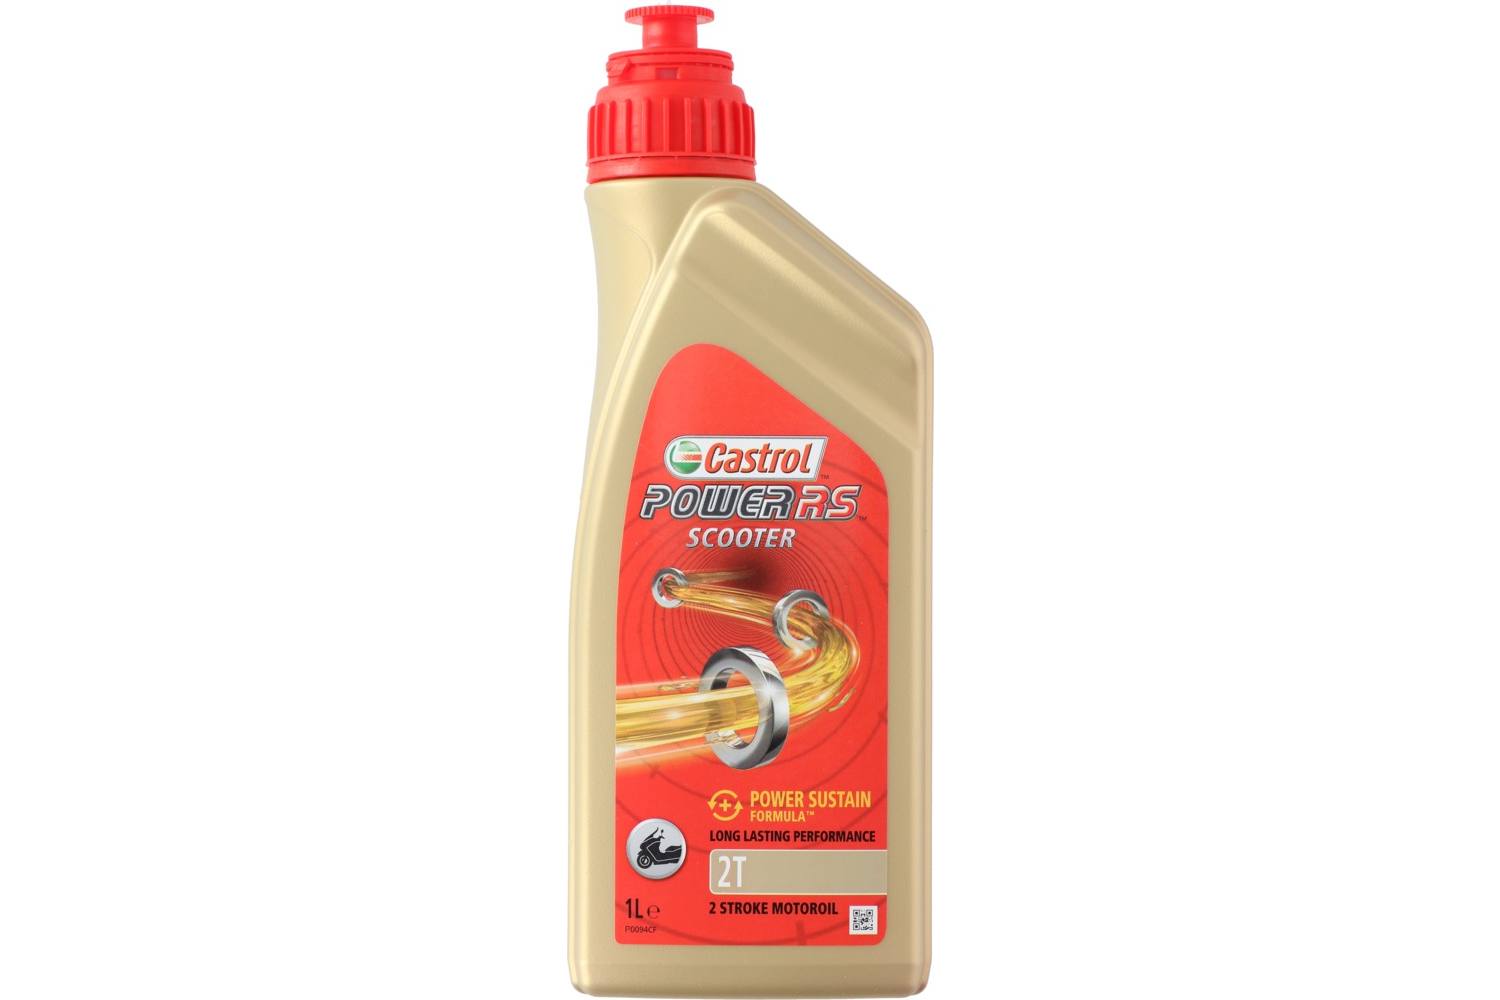 Motor oil, Castrol power rs scooter, 2T, 1l 2